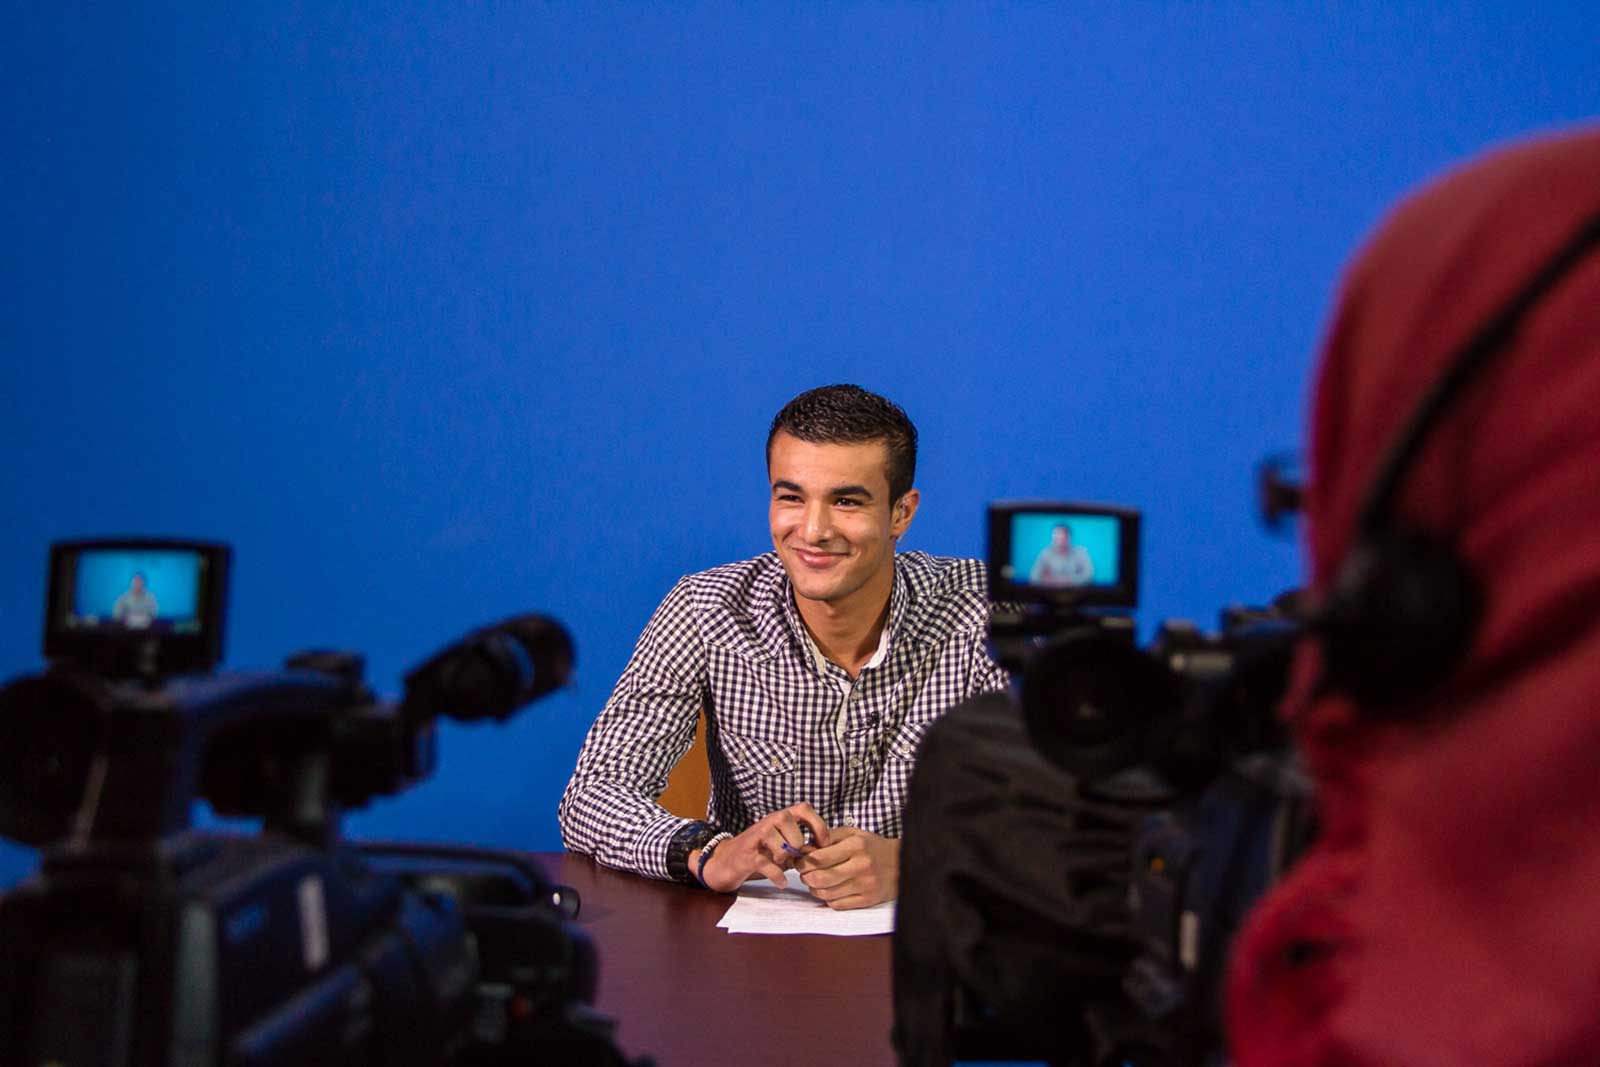 IWPR interns producing a television report as part of a course at the Media Lab of the University of Tripoli, March 2014. Â© IWPR